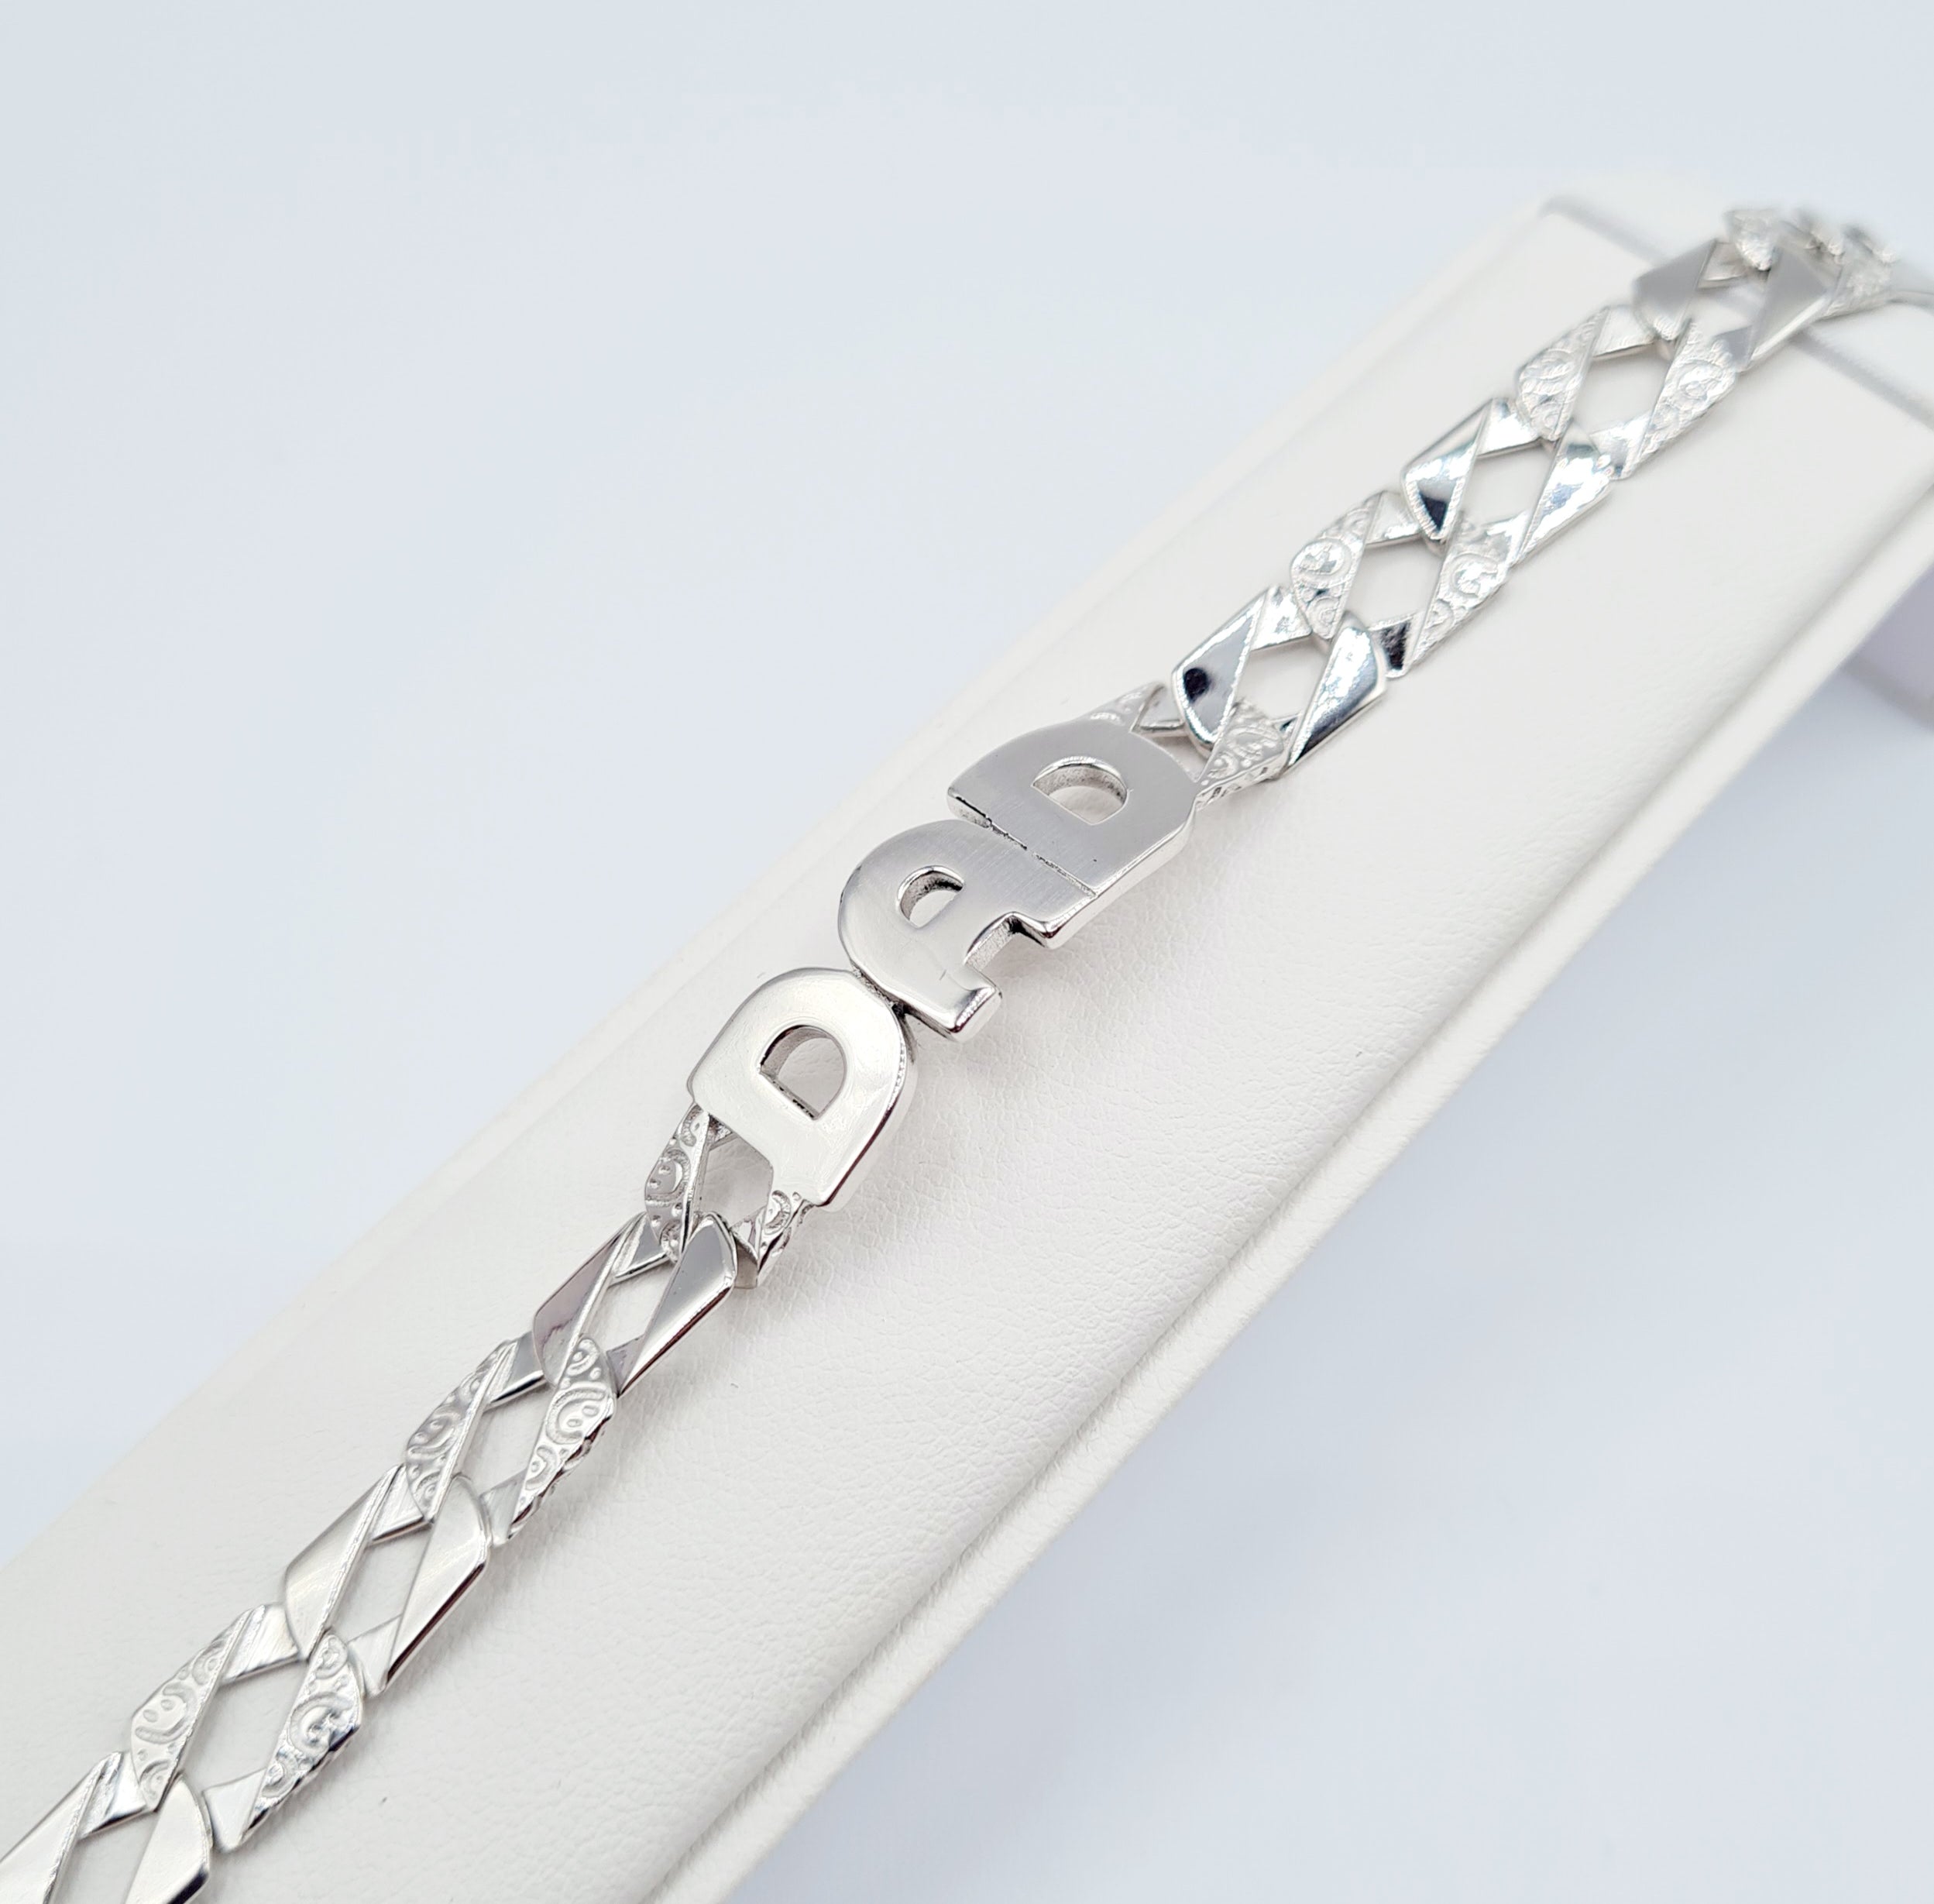 Sterling Silver Dad Curb Bracelet - Forever Jewellers Cork  Forever Jewellers Cork | Forever Jewellers, Maria Gleeson Jewellers, , Forever Jewellery,  Gold and Silver rings, tennis sets, bracelets, Ladies Ring Sets, childrens. Kids Jewellery womens jewellery Cork Mens rolex style jewellery cork free curb bracelet jewellery cork city bangles christening wedding bride to be Jewellers Cork . Engagement Ring, Wedding Jewellery Cork